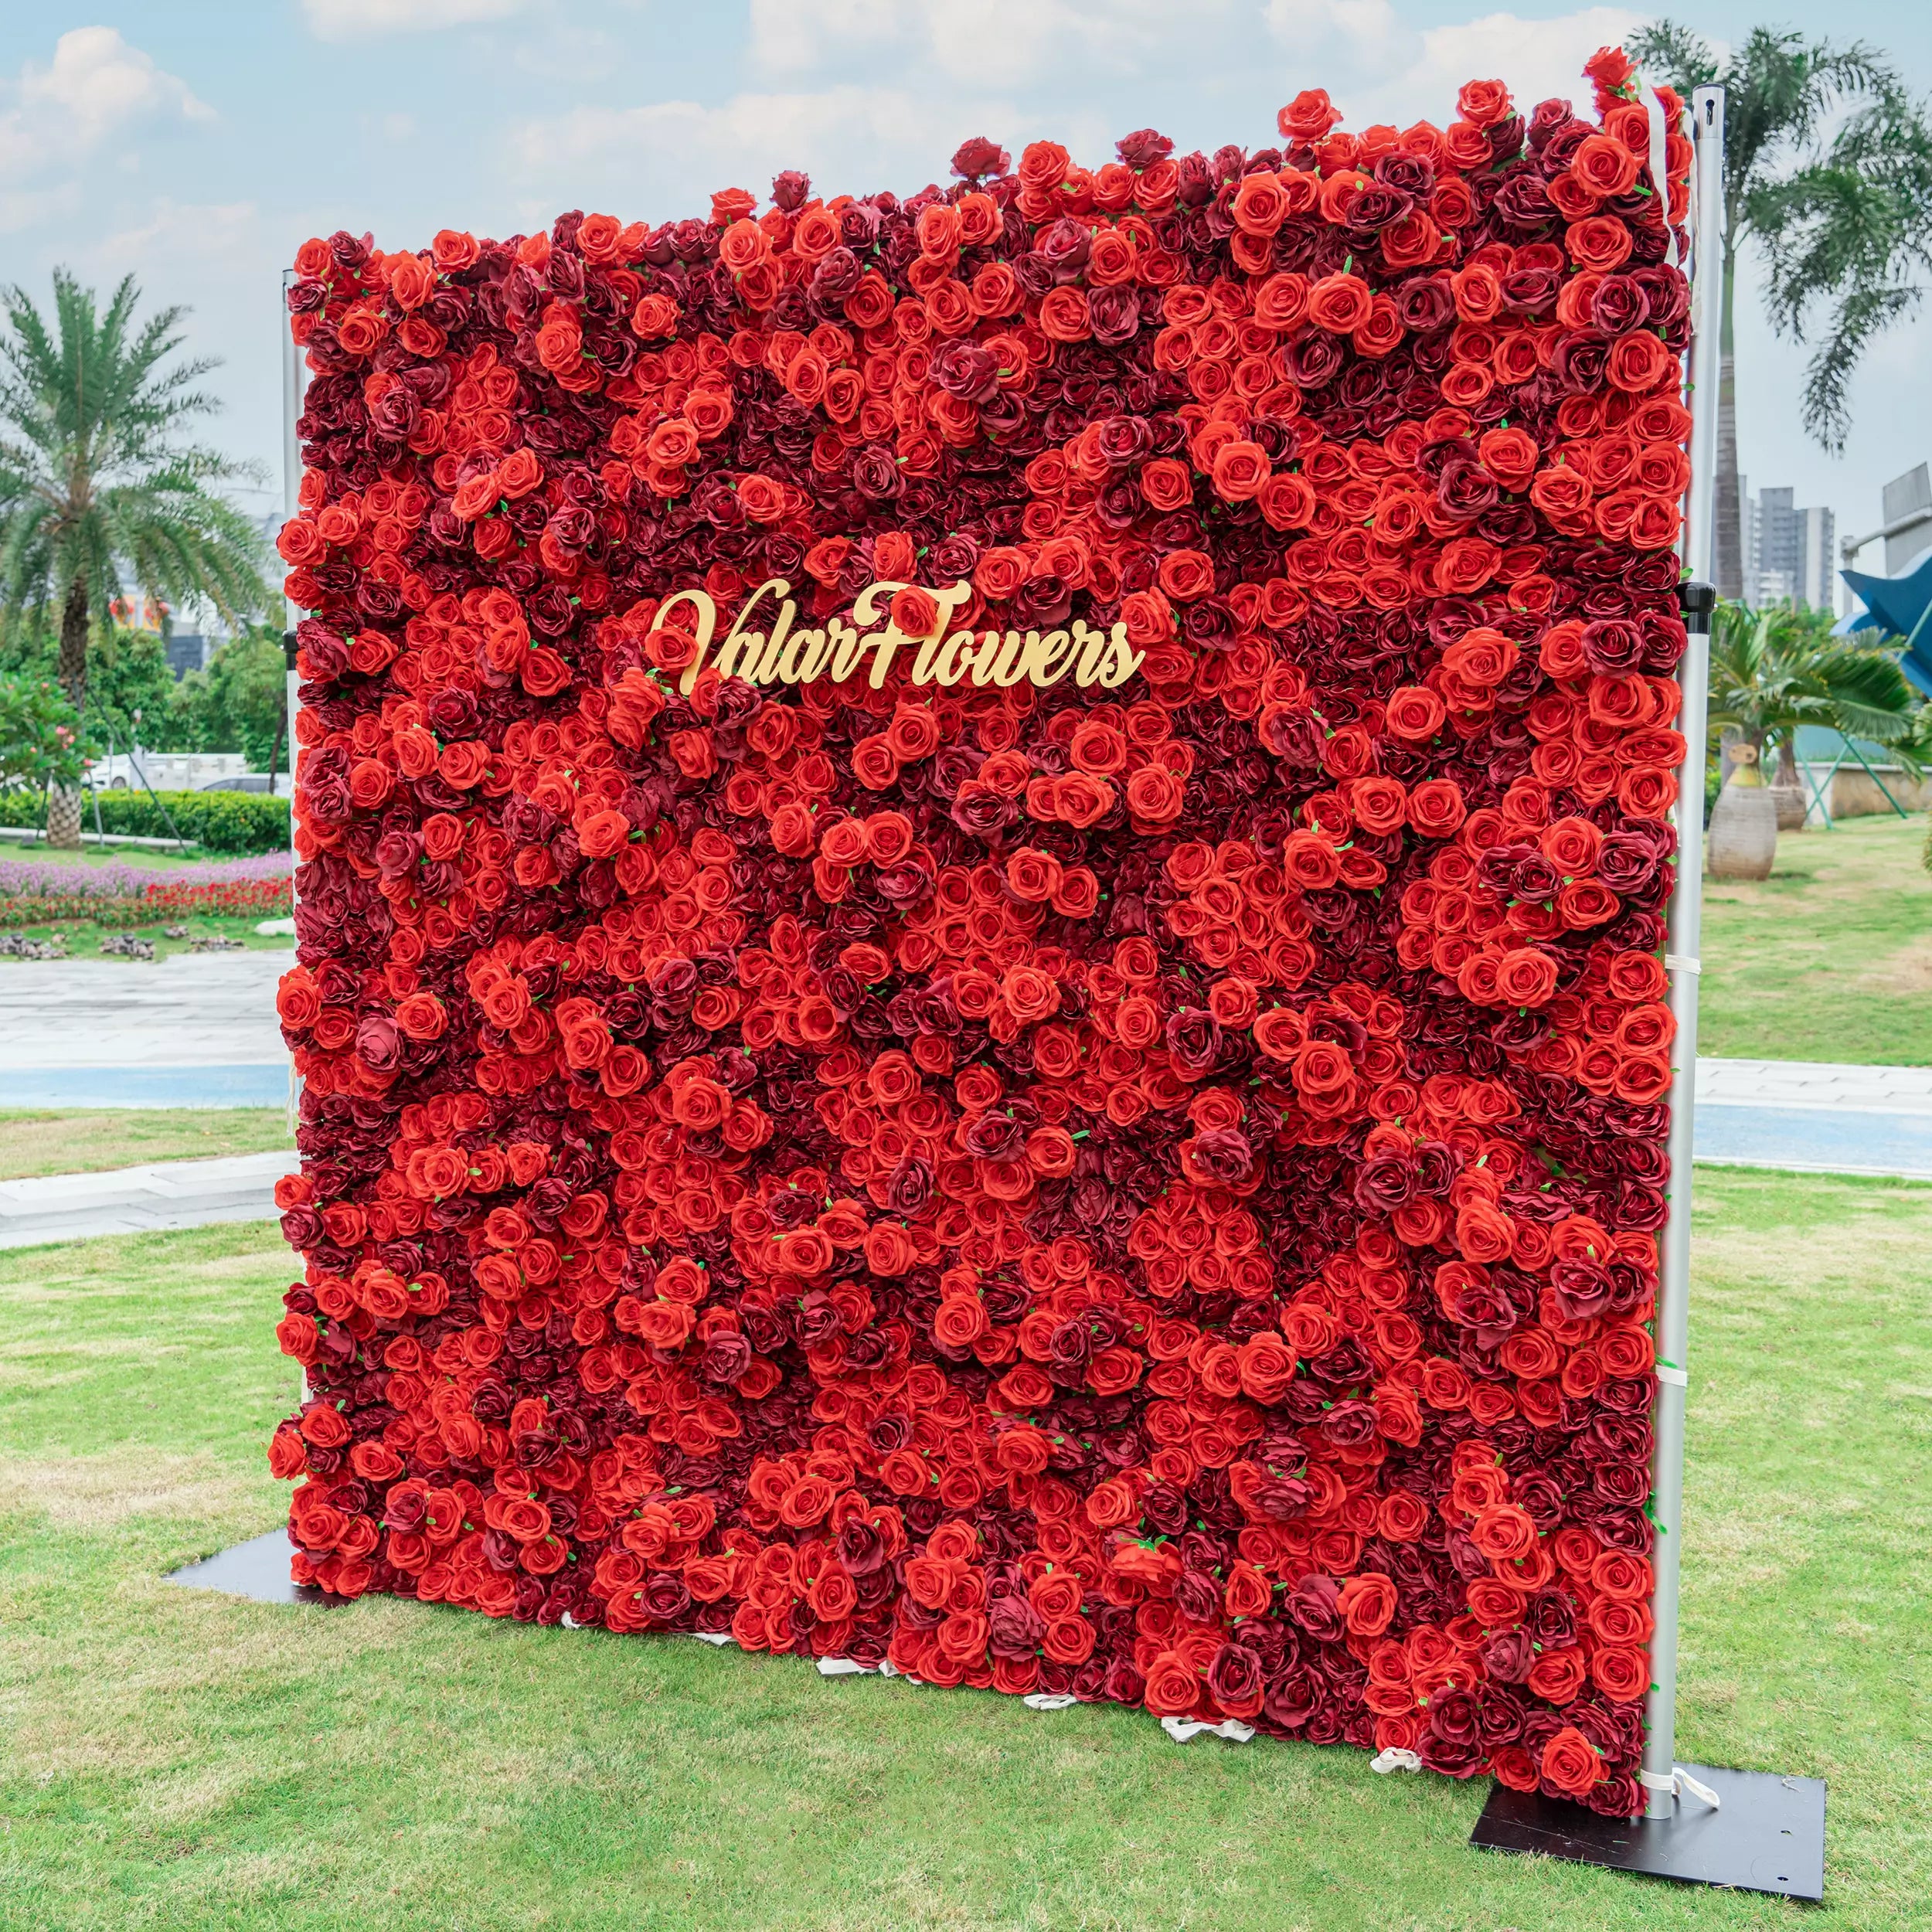 Ruby Rose Radiance: A mesmerizing display of lush, velvety red roses densely packed together, exuding passion and luxury. The golden "VlairFlowers" logo shines brilliantly, nestled among the blooms. Set in an urban park, this opulent floral wall becomes an urban oasis of beauty.